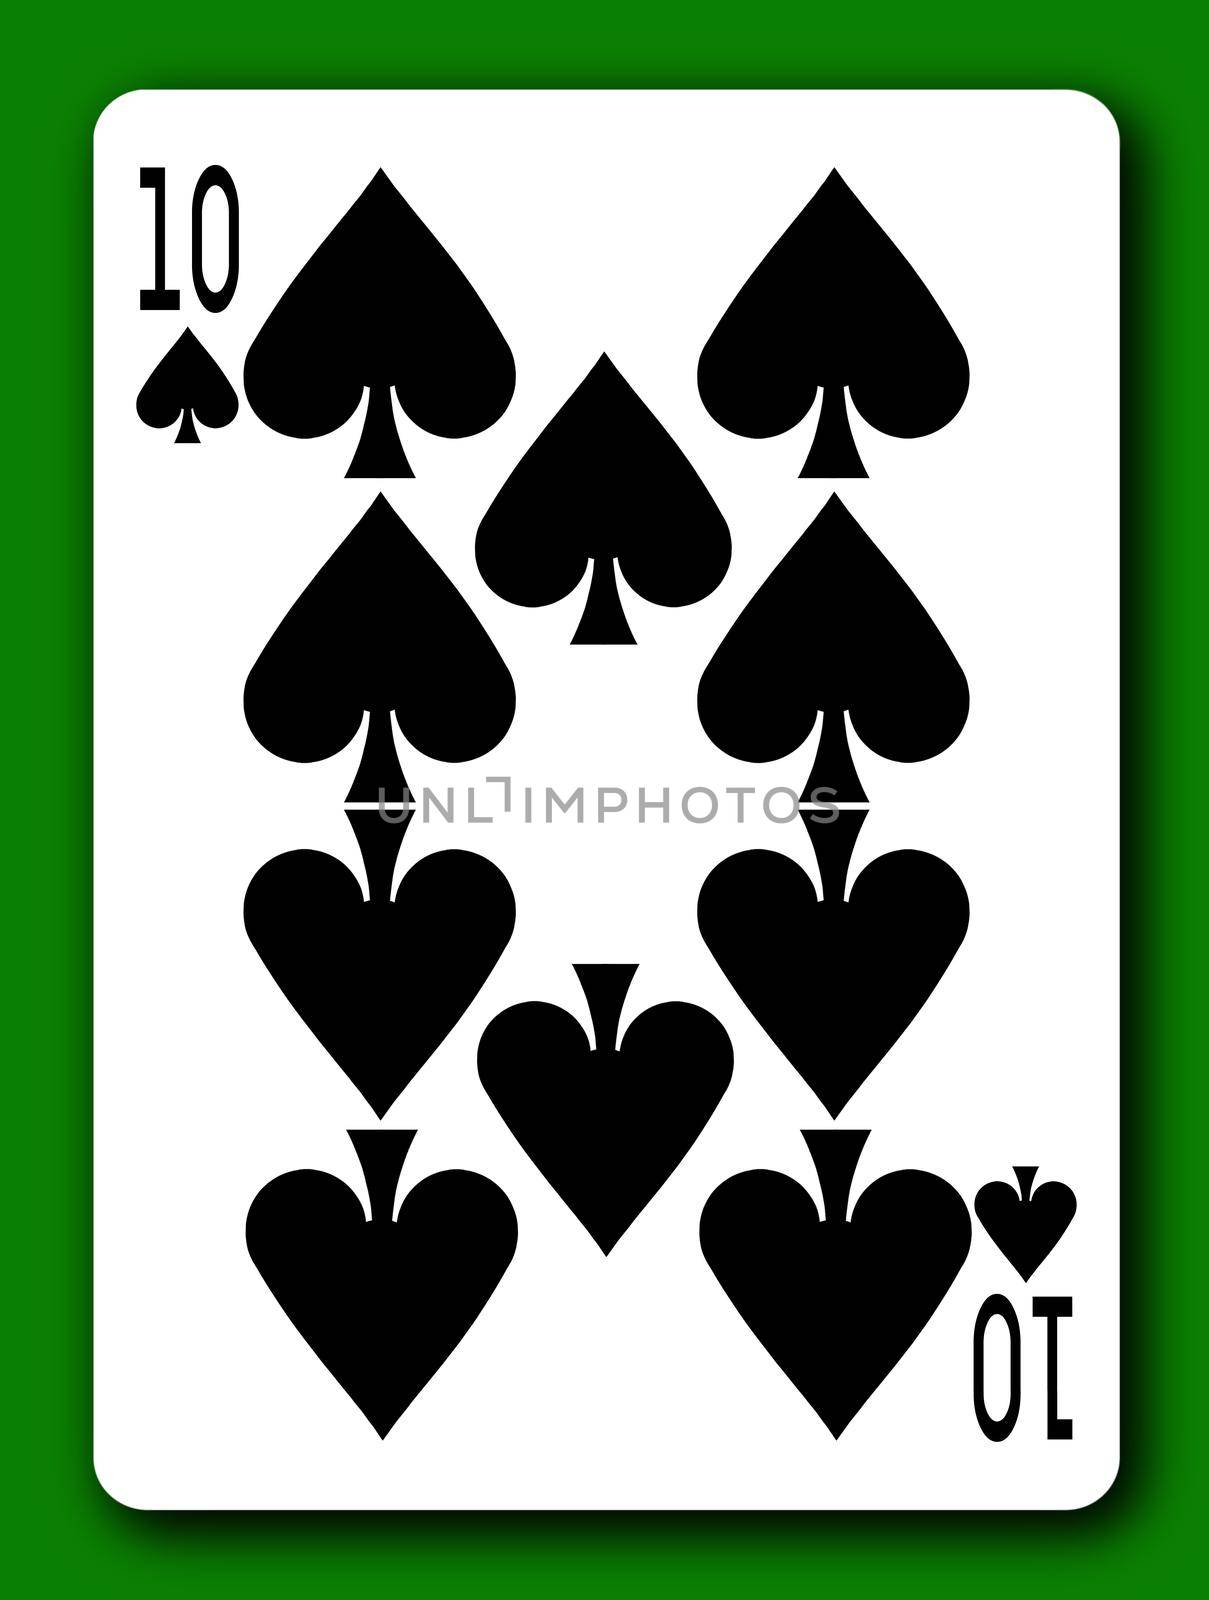 10 Ten of Spades playing card with clipping path to remove background and shadow by VivacityImages